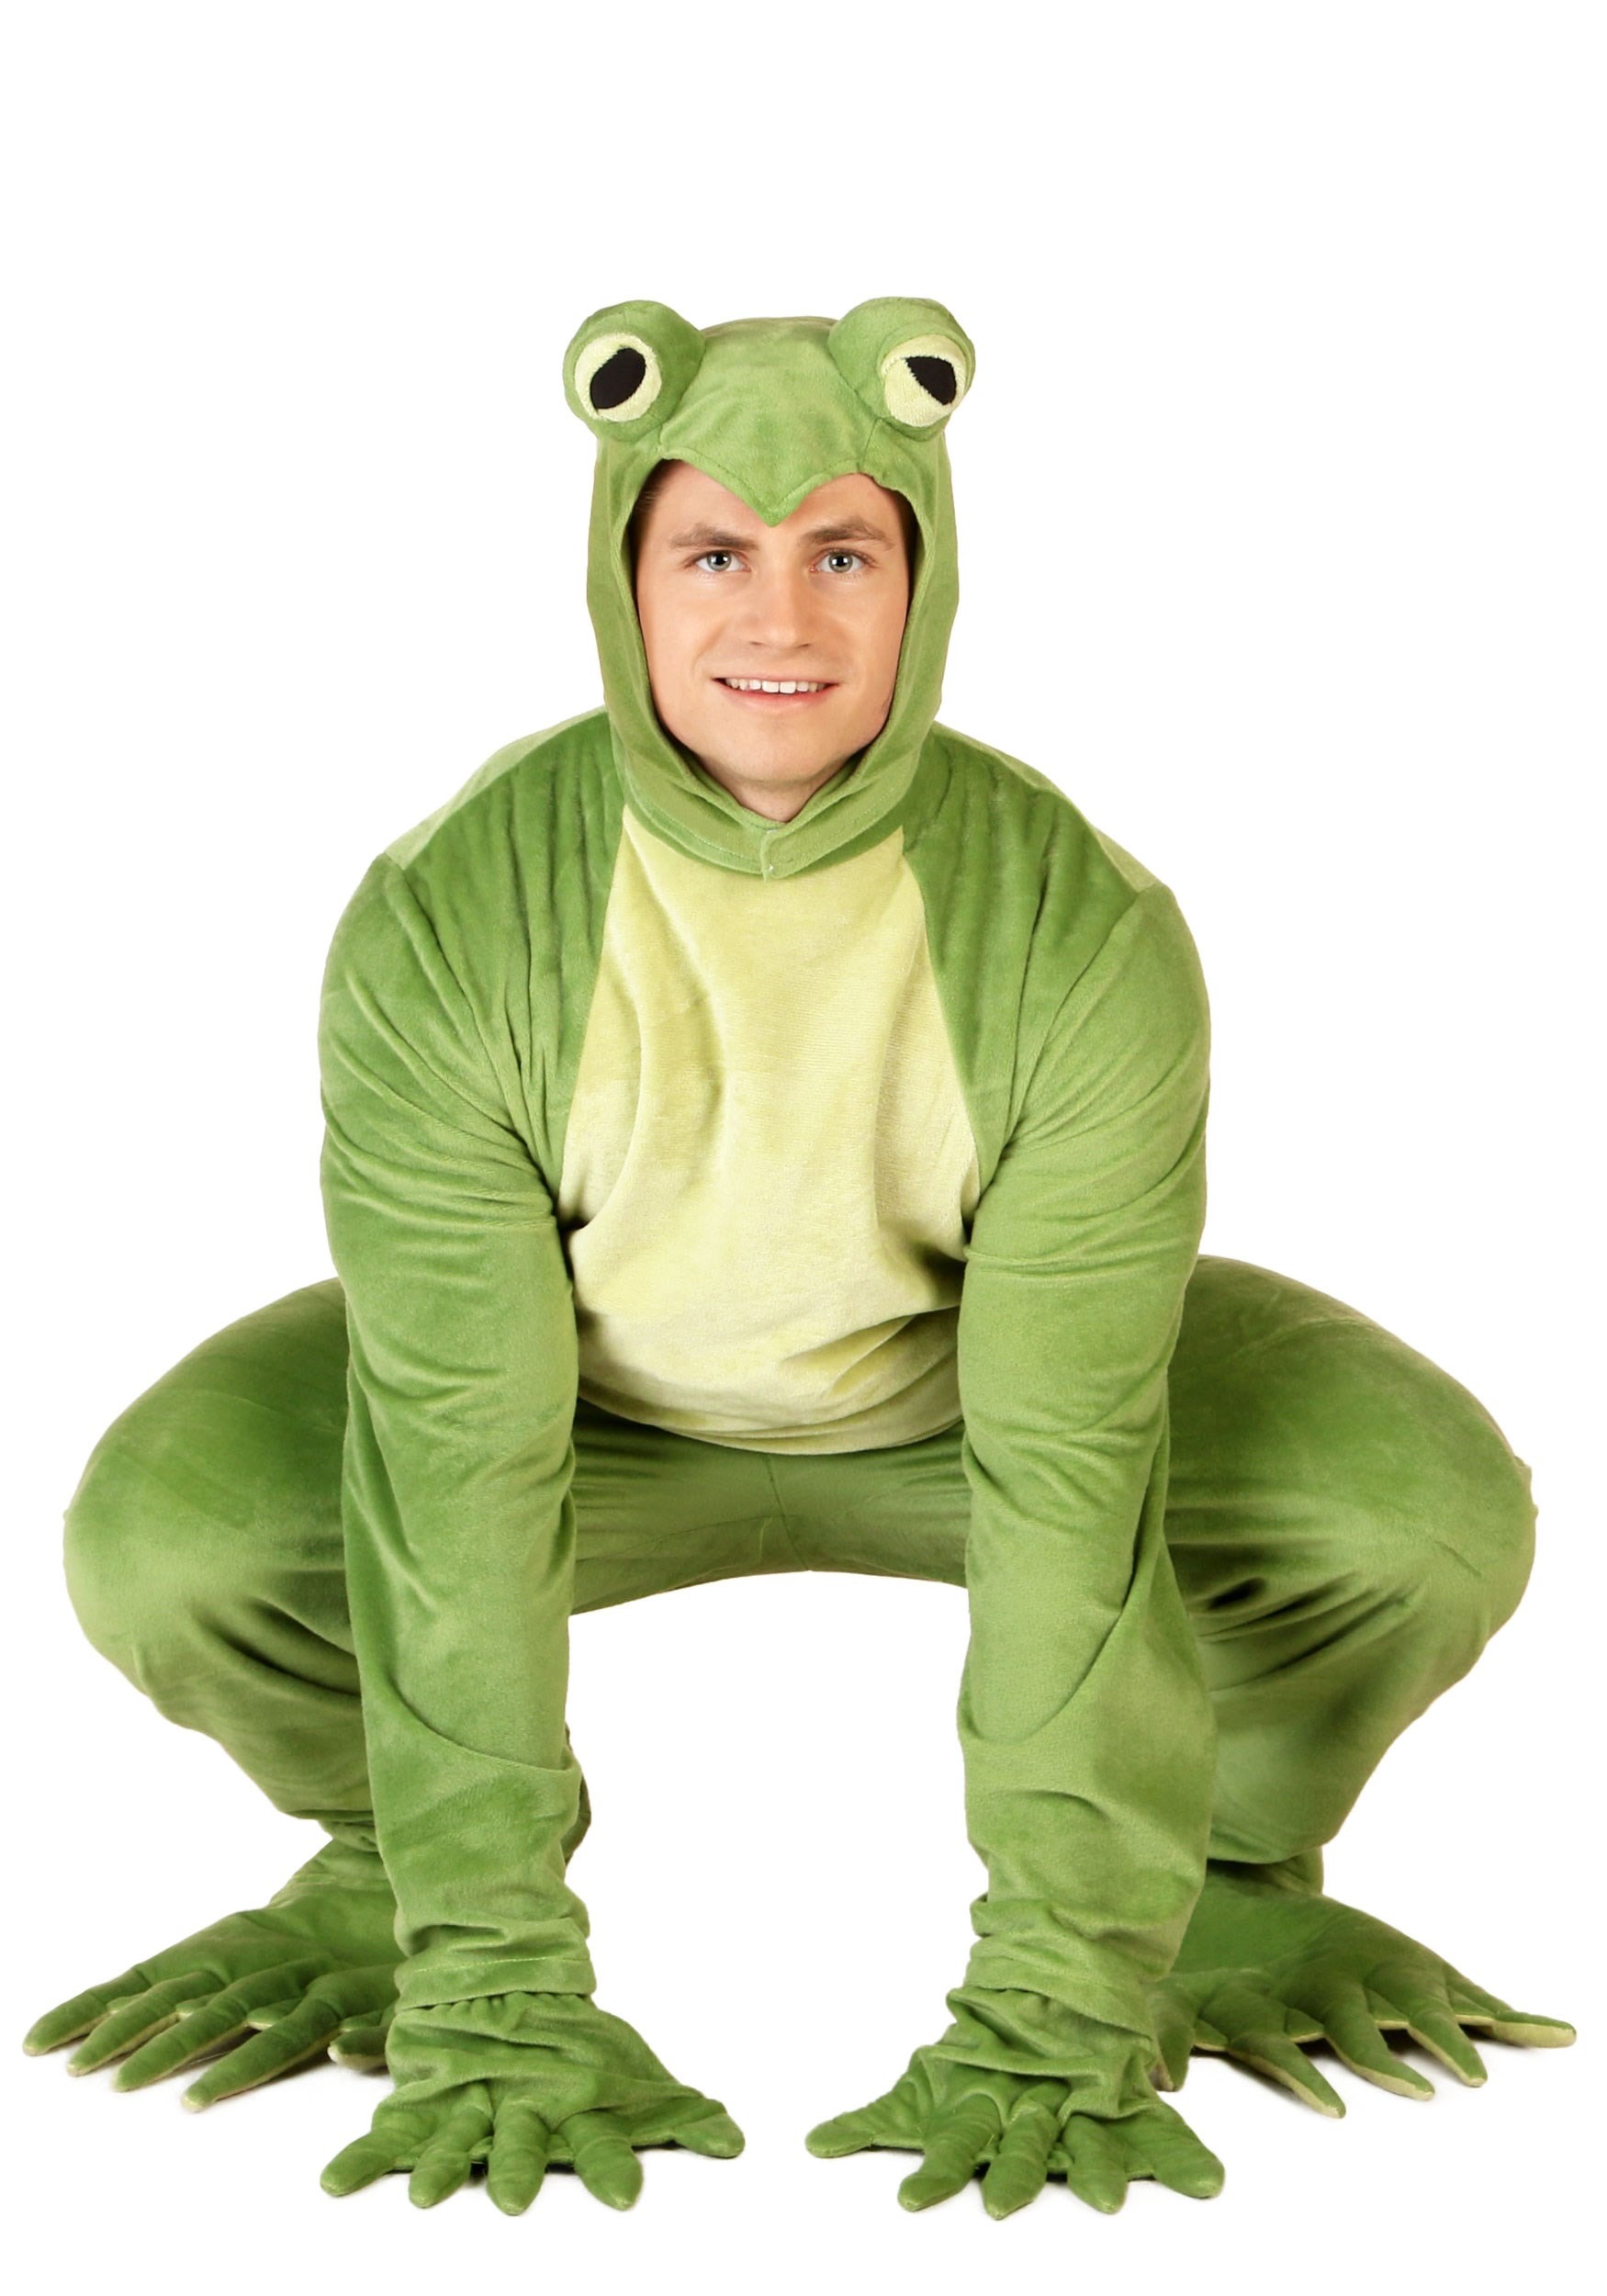 Deluxe Frog Costume for Adults